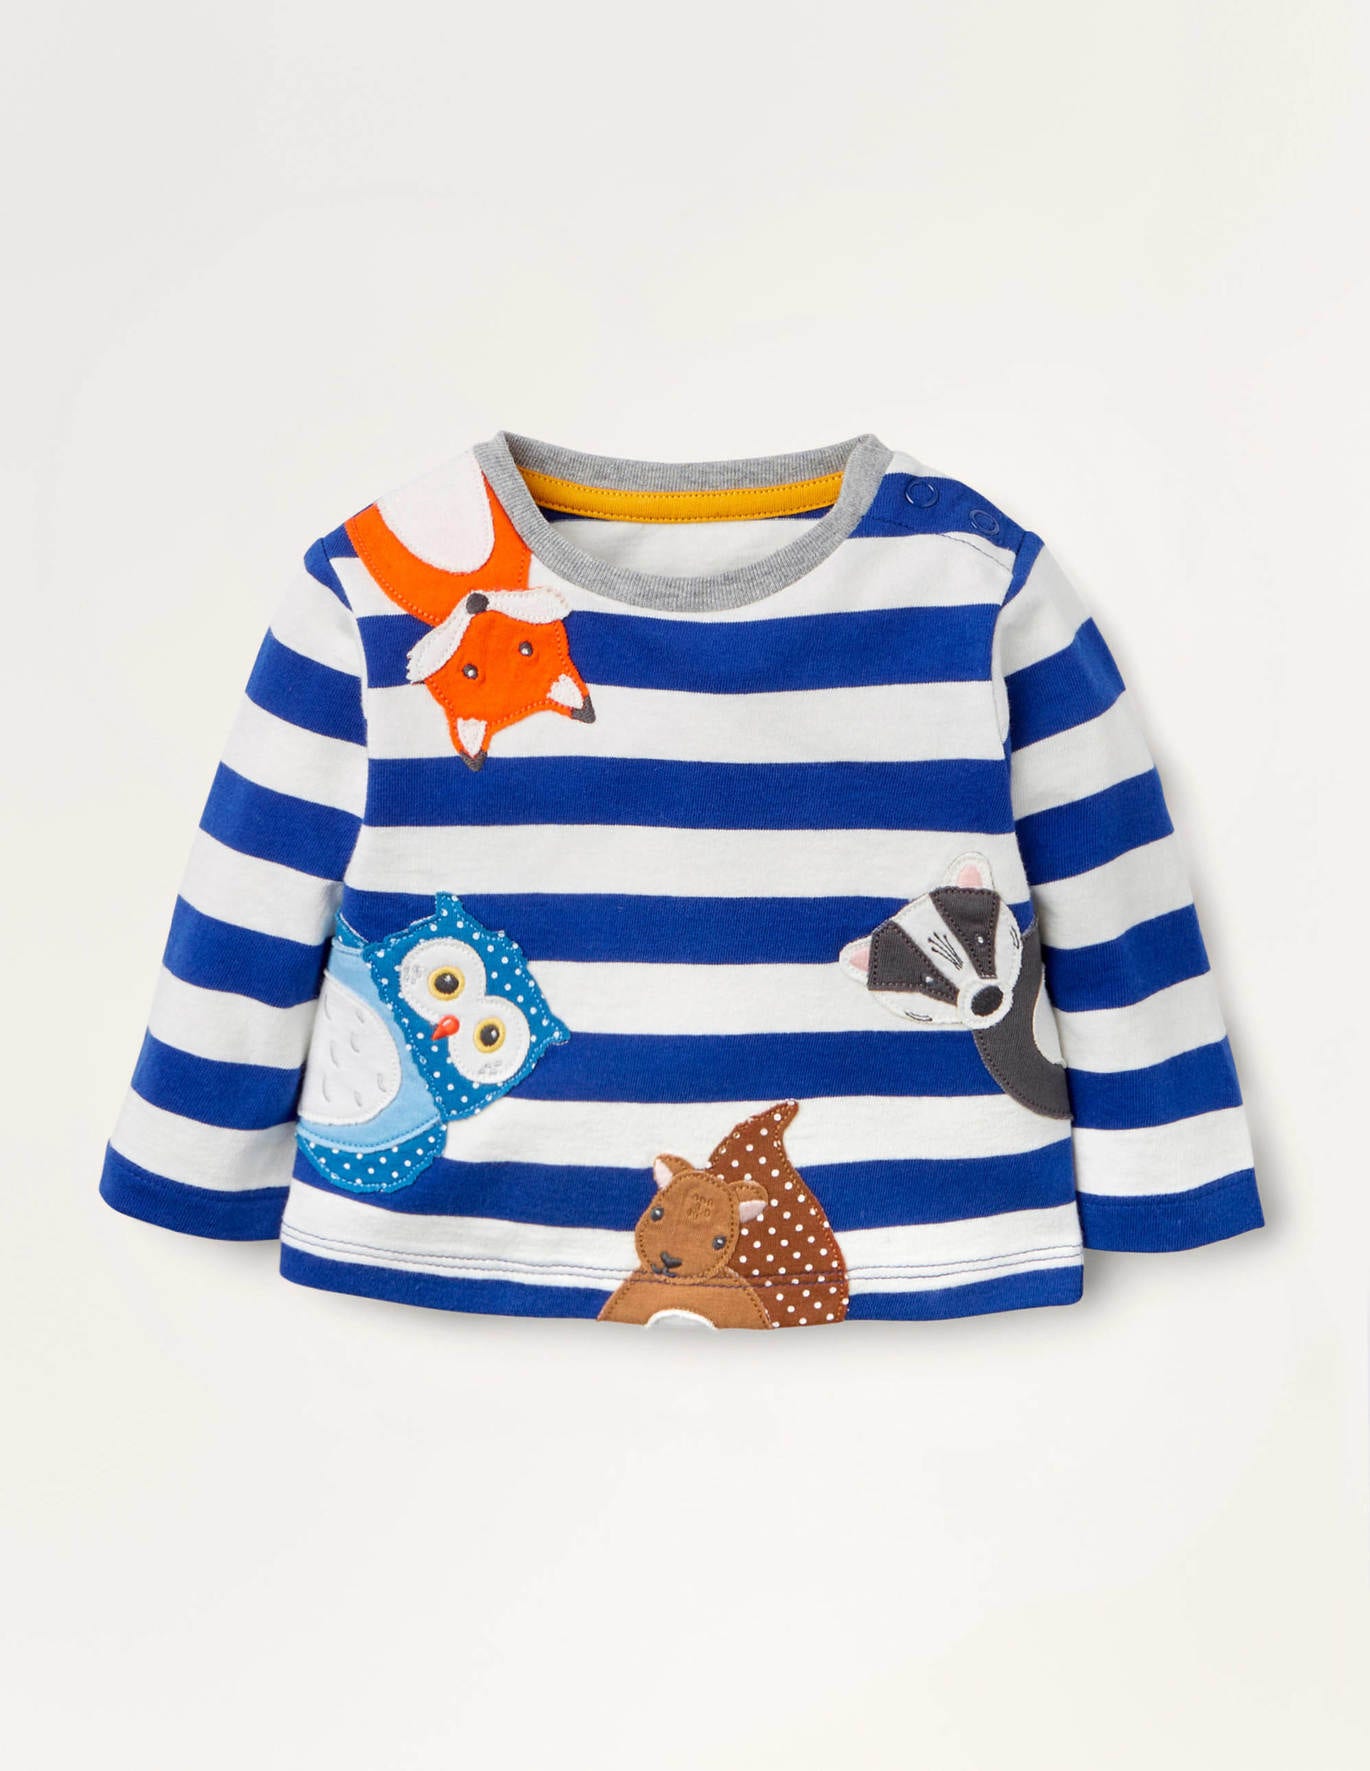 Brand new Mini Boden Boys Applique long sleeve top cotton UK Size 3-4 years 